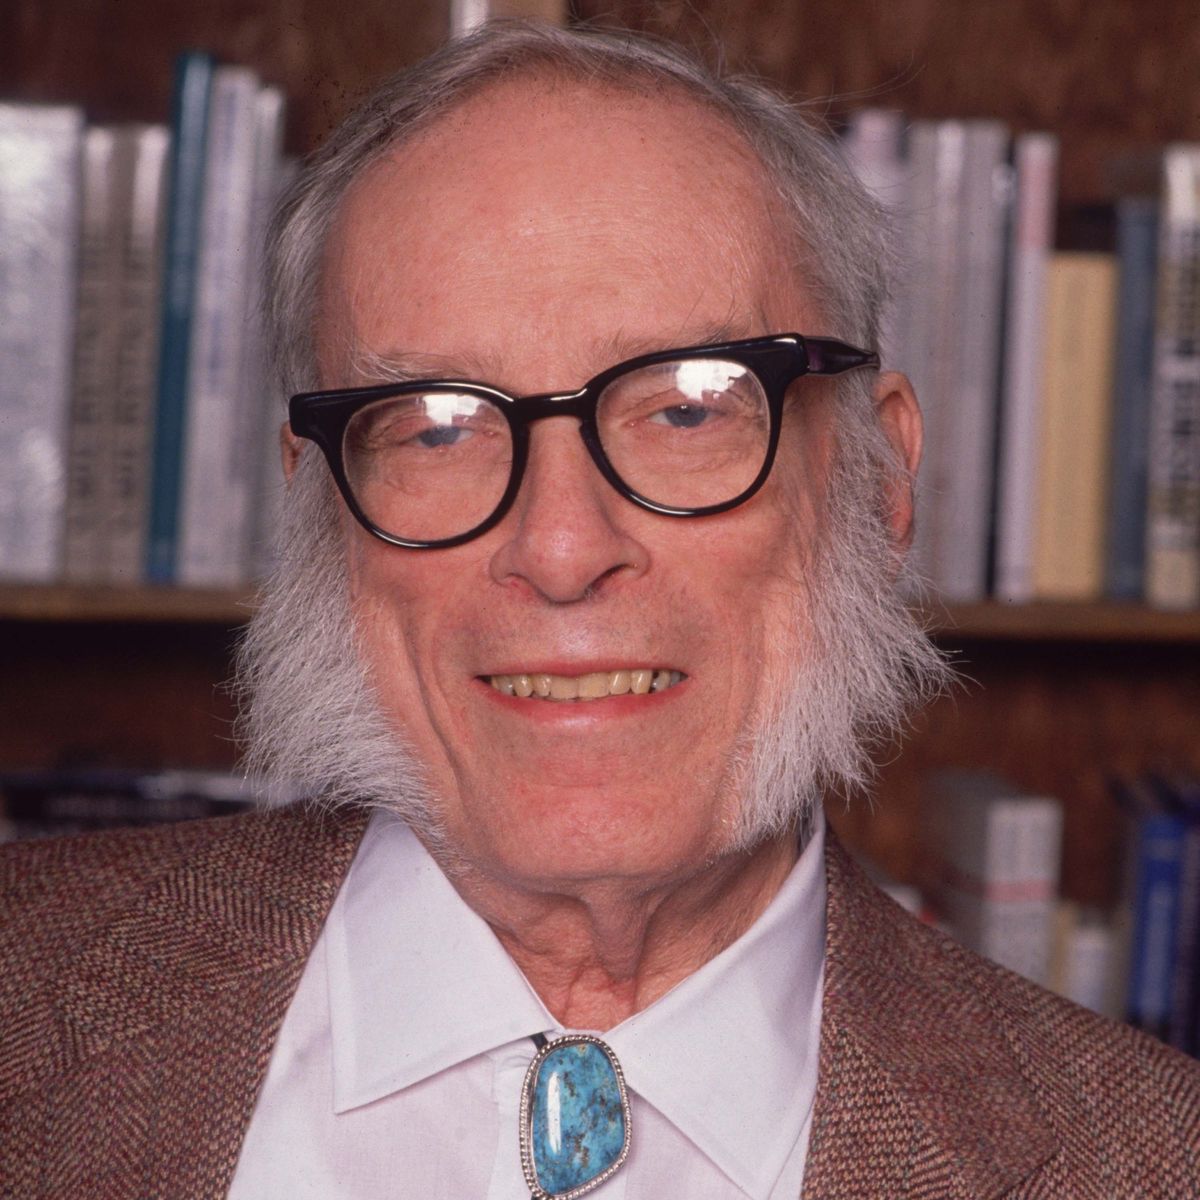 American writer and professor #IsaacAsimov died from #AIDS #onthisday in 1992. #Asimov #author #sciencefiction #popularscience #FoundationSeries #robots #IRobot #futurehistory #Nightfall #mystery #fantasy #fiction #biochemistry #trivia